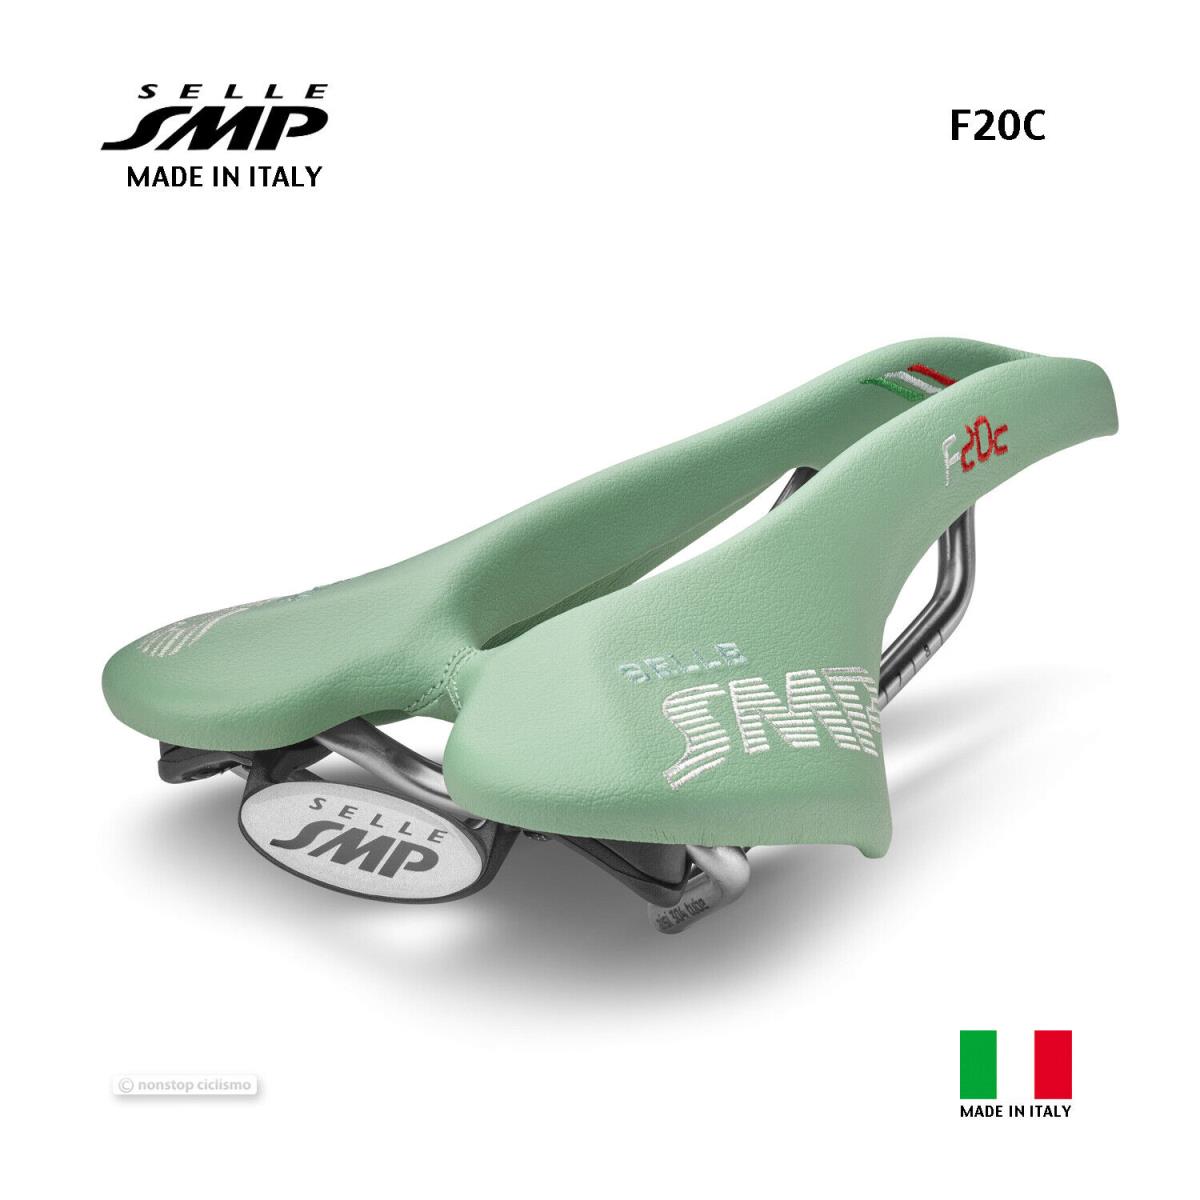 Selle Smp F20C Saddle : Bianchi Celeste - Made IN Italy